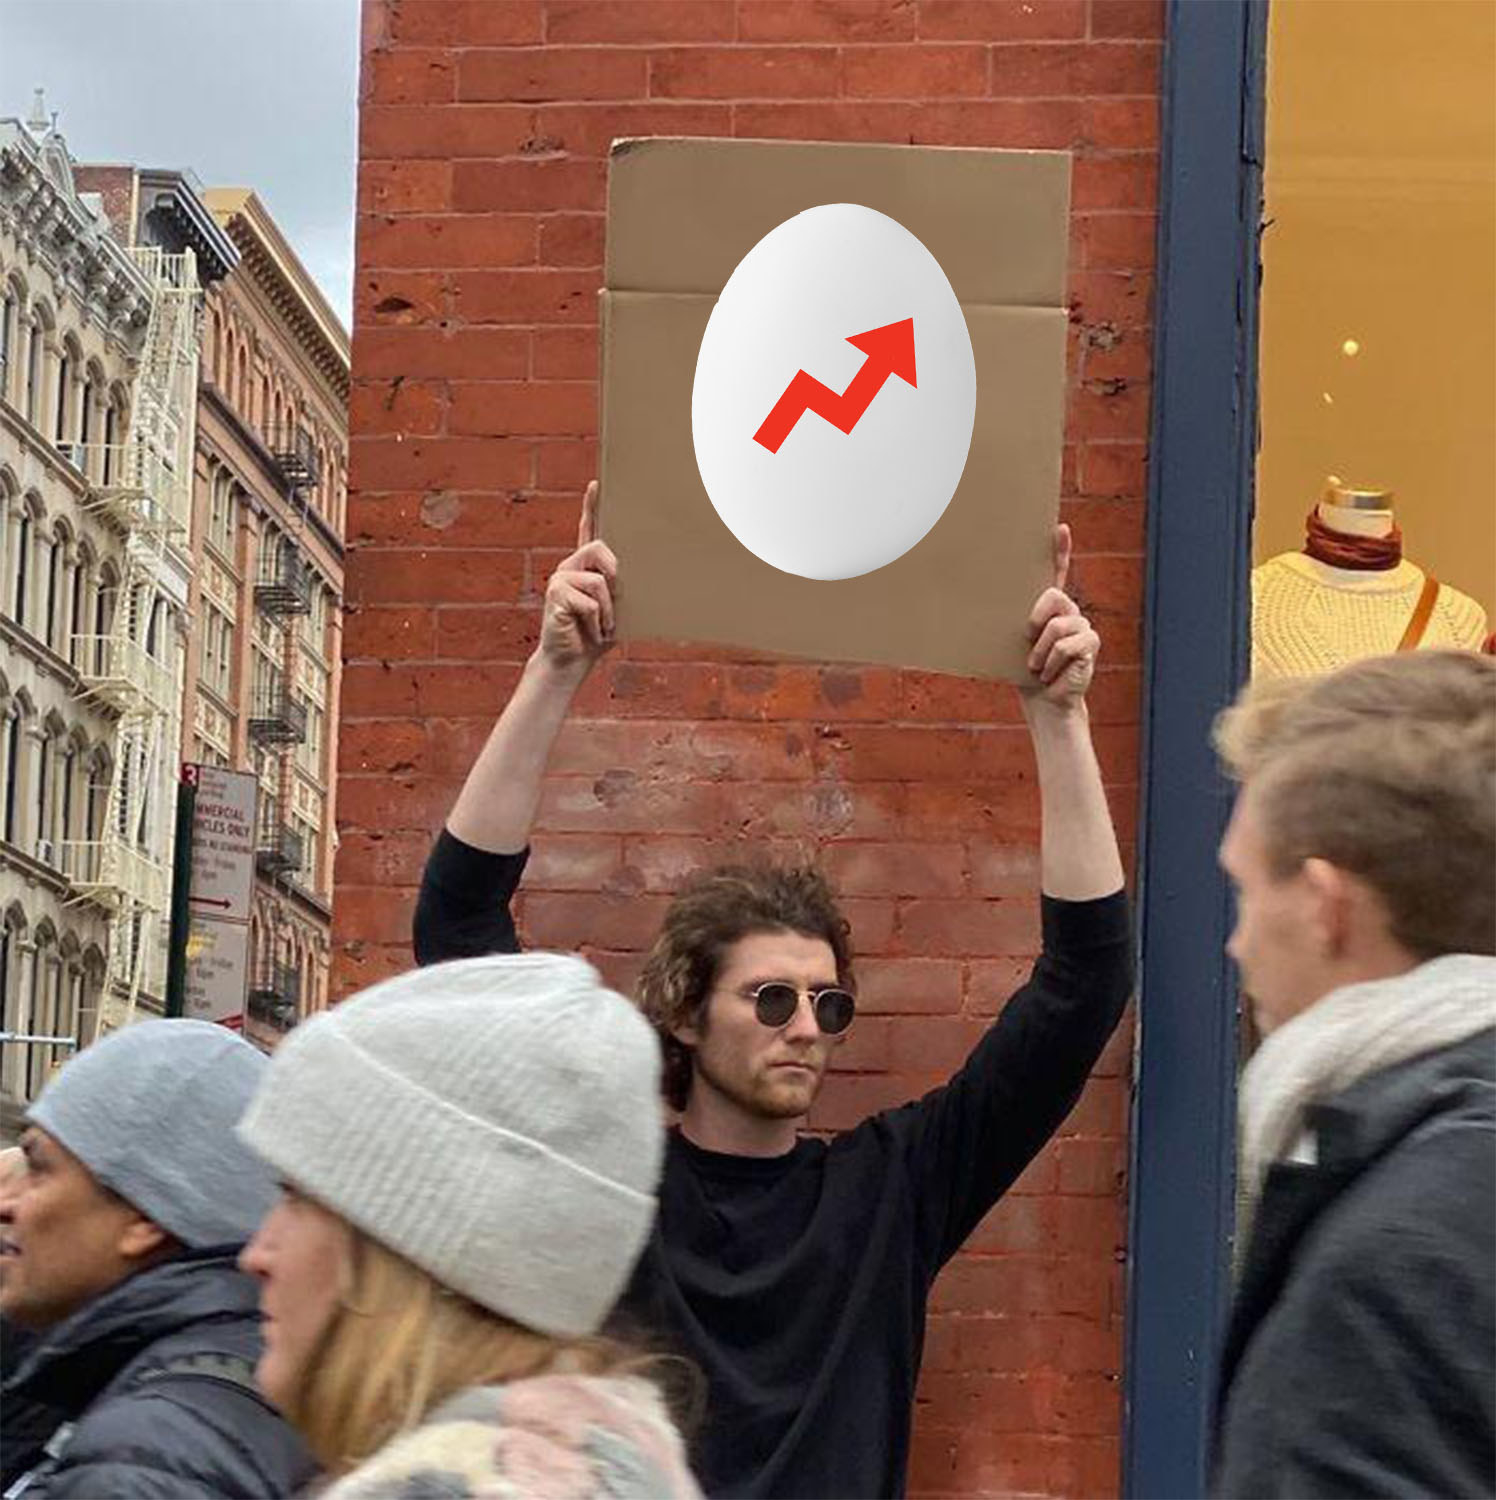 Meme with a guy holding up a sign, on the sign is an egg with the BuzzFeed logo.